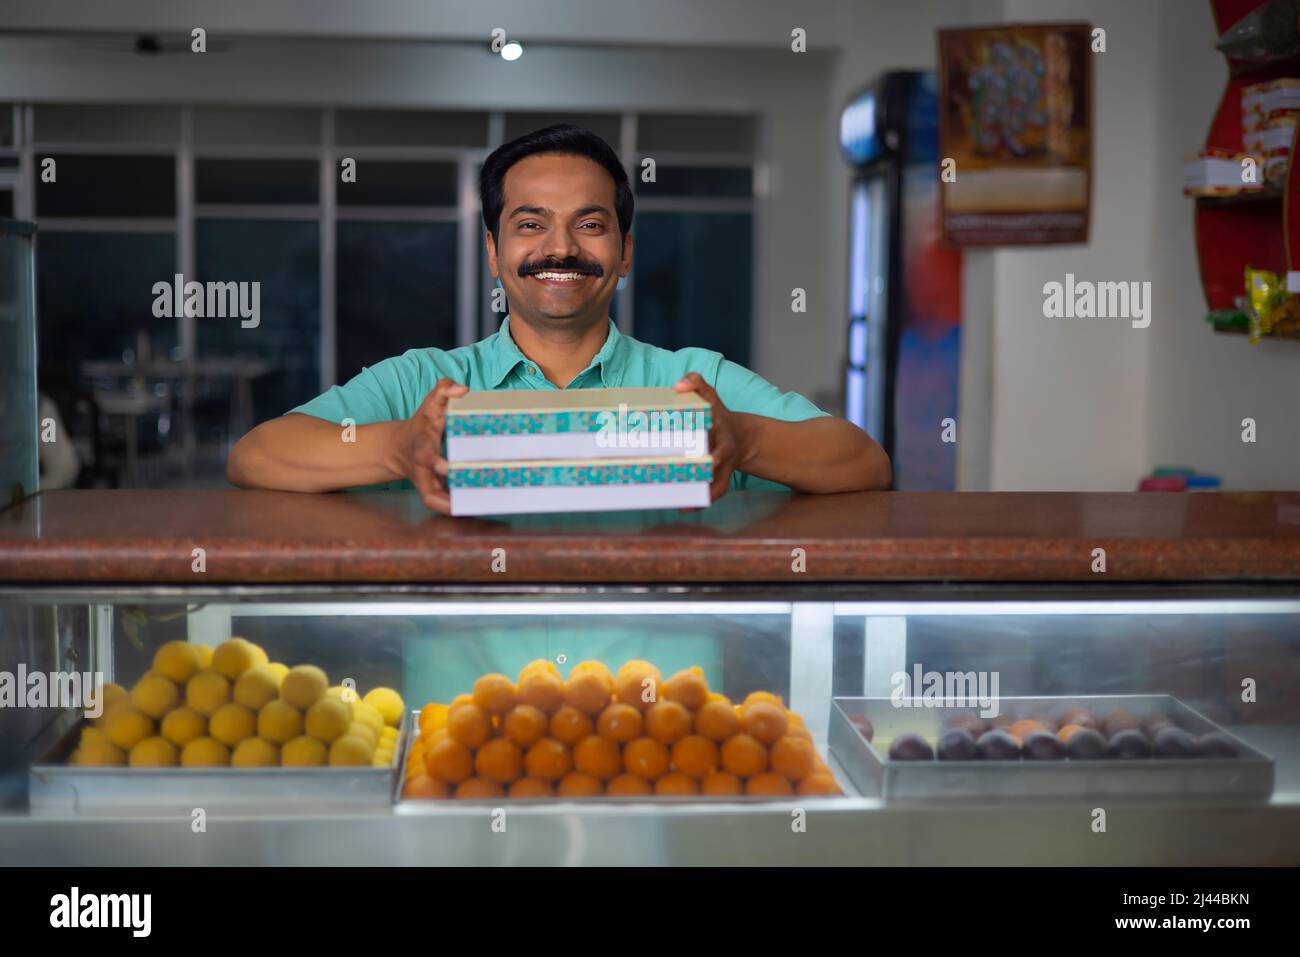 Sweet shop owner selling sweet to customer Stock Photo